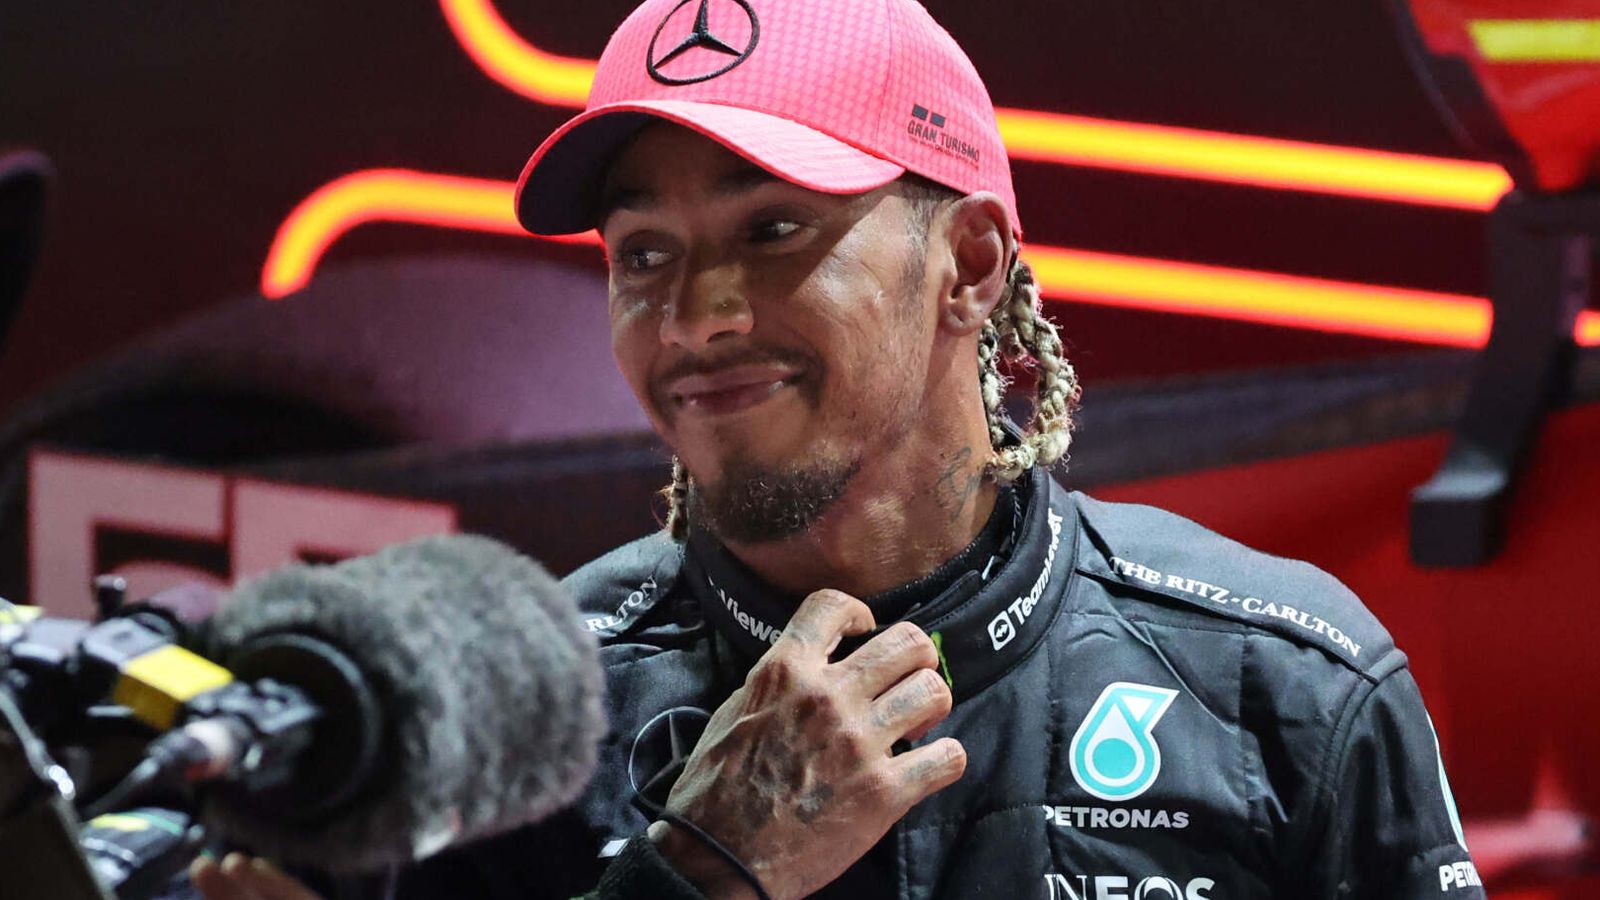 Hamilton: Mercedes must 'level up' | 'Time will tell' on Singapore shocks